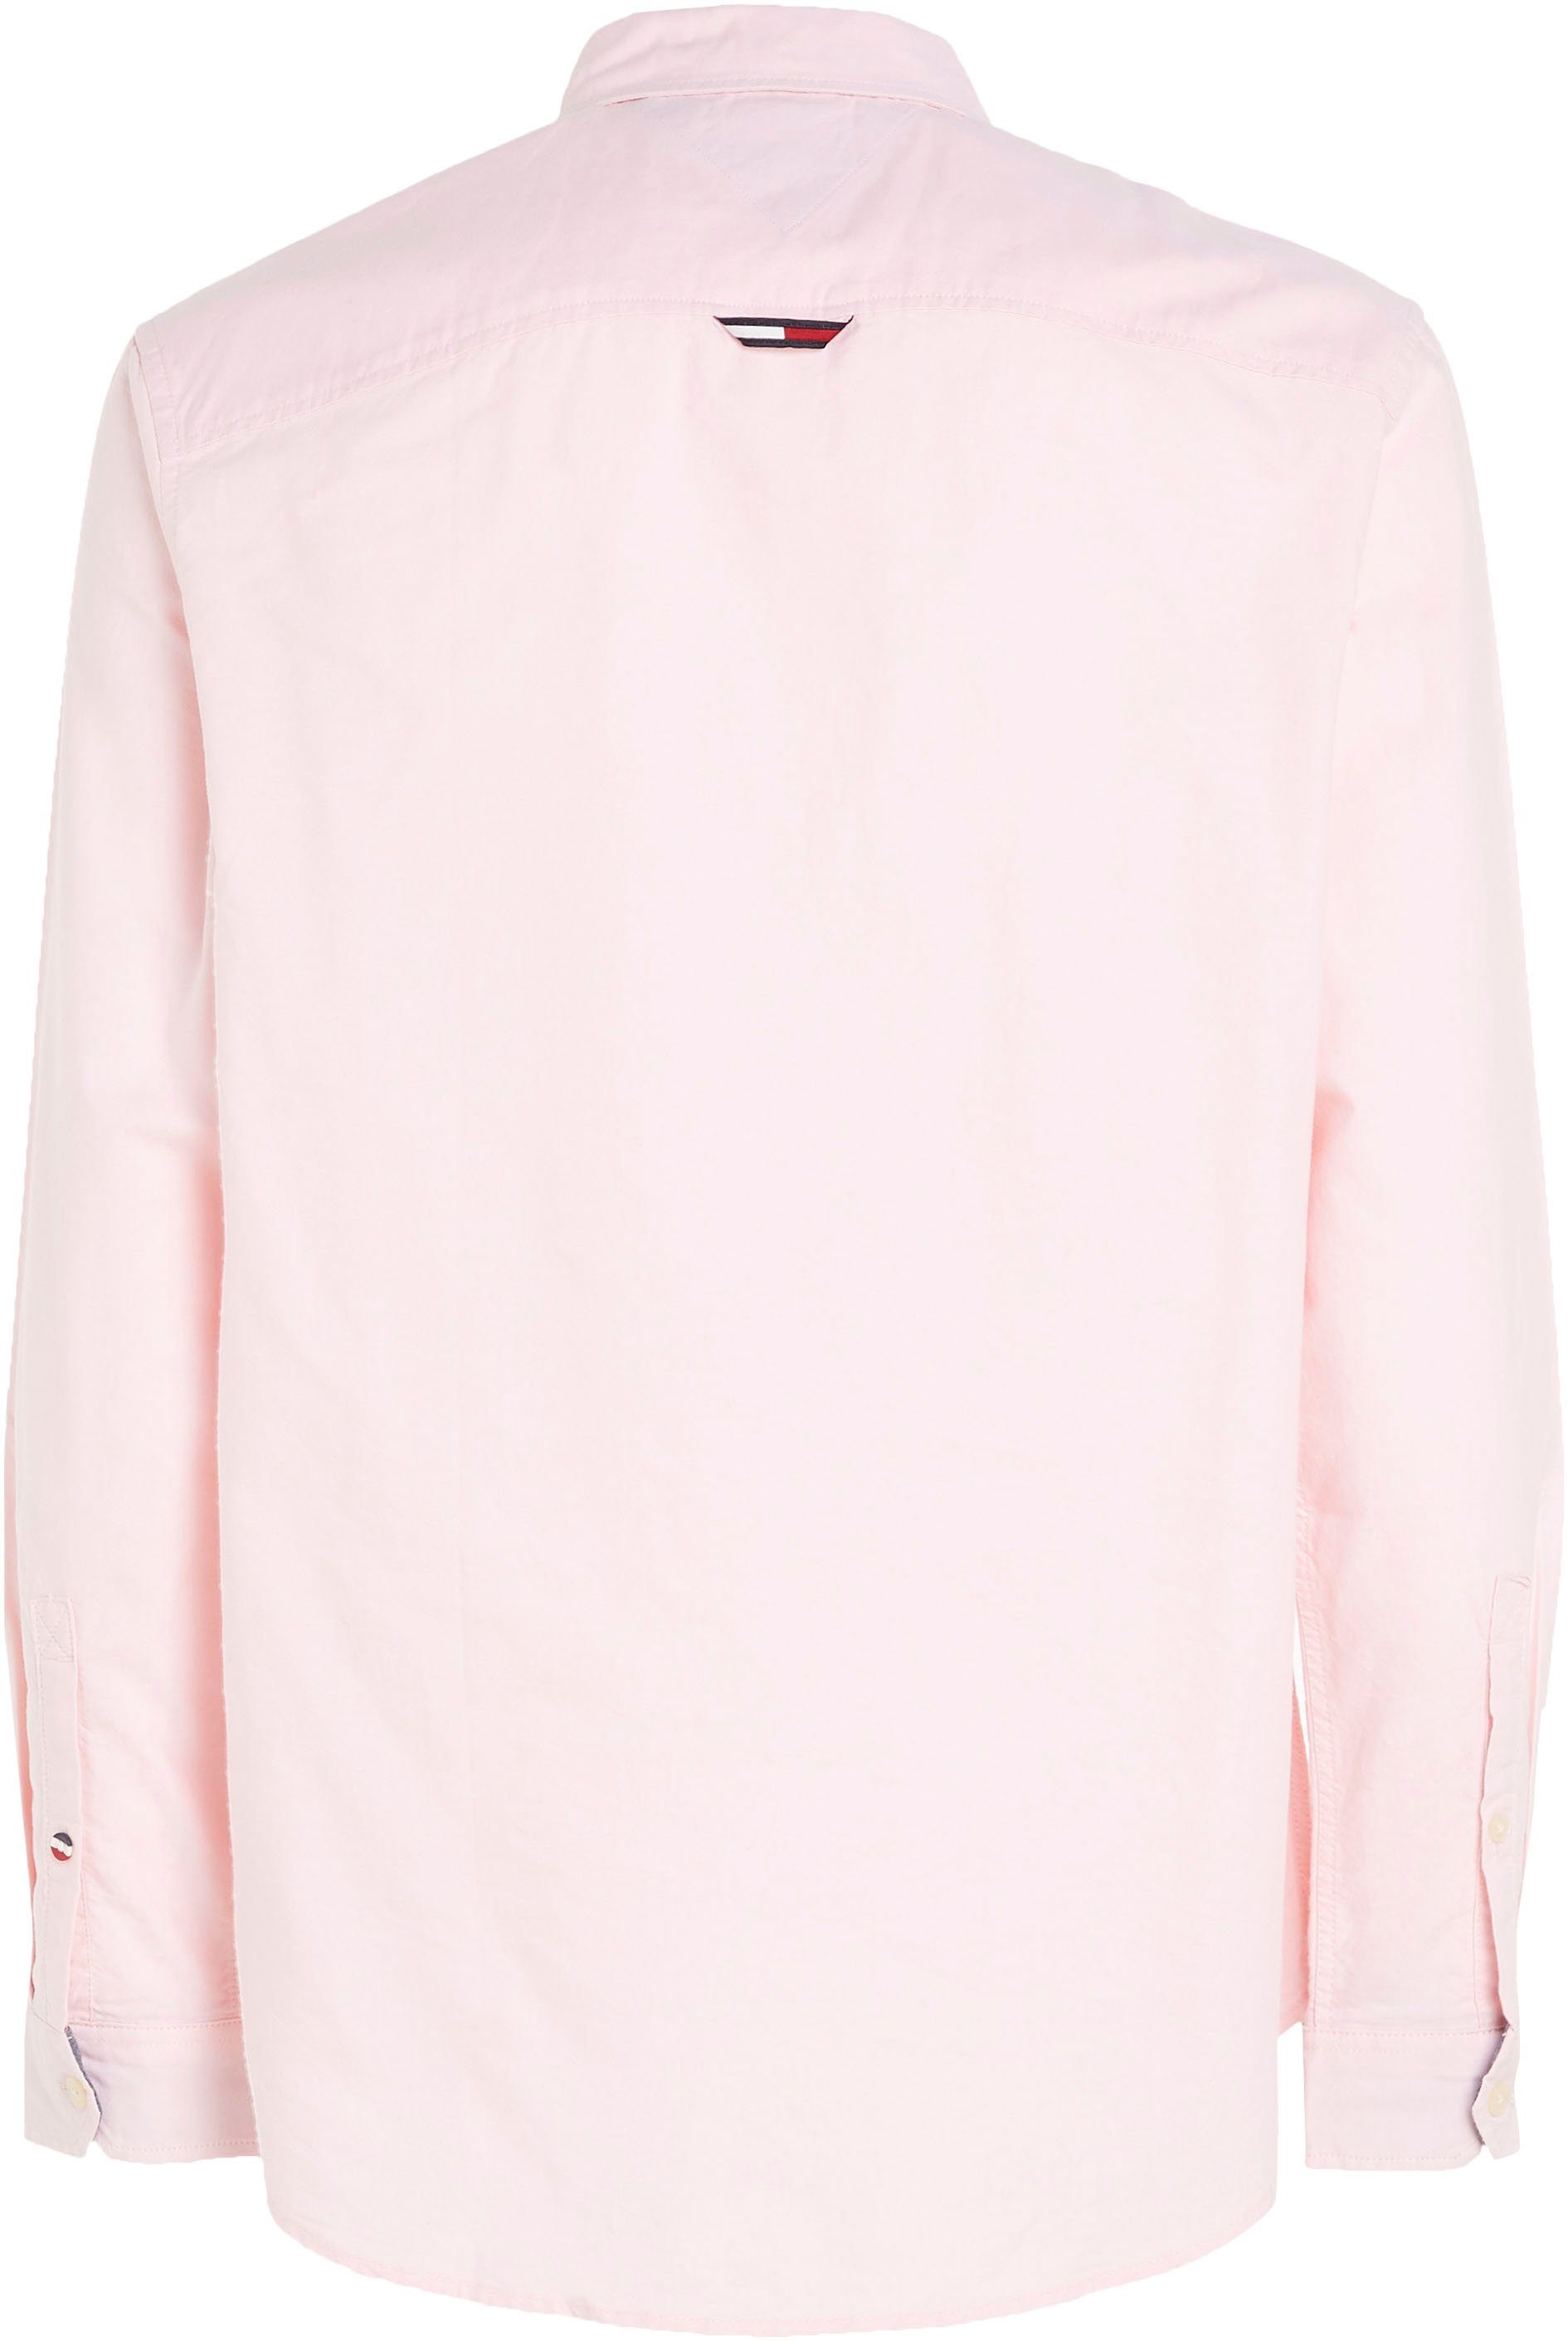 OXFORD CLASSIC Tommy Langarmhemd mit Knopfleiste Jeans pink TJM SHIRT